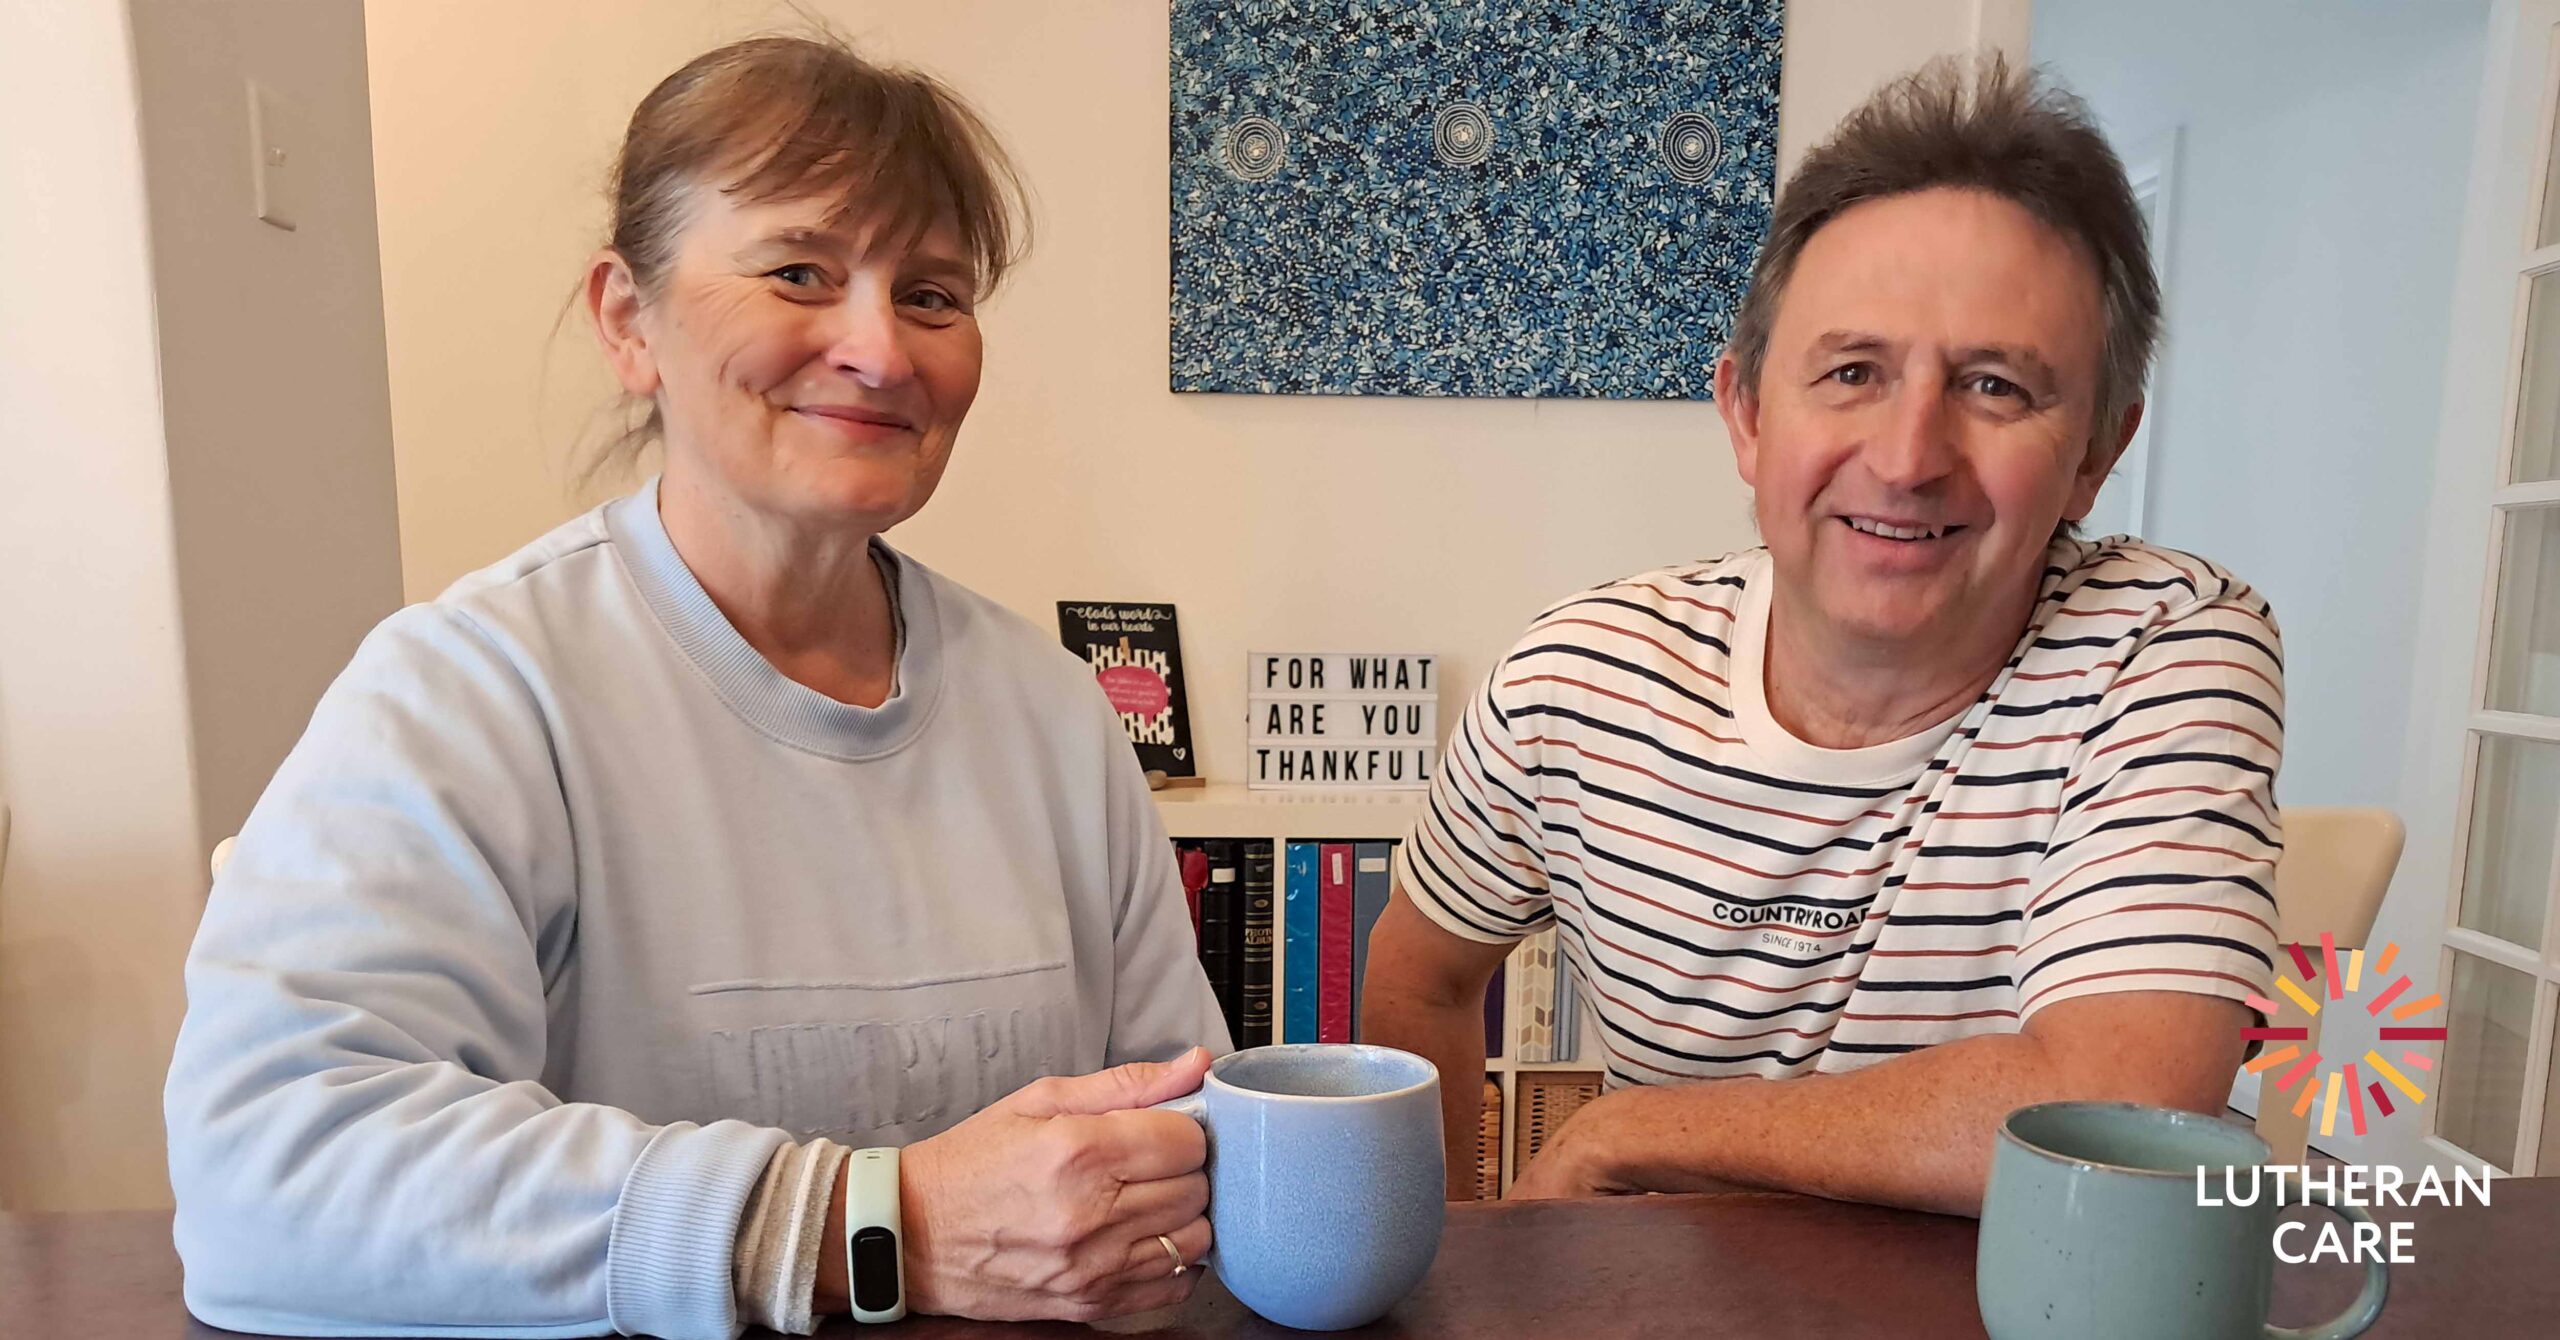 Foster Carers Kristy and Chris sit with a cup of coffee or tea in their home. The Lutheran Care logo appears in the bottom right hand corner.